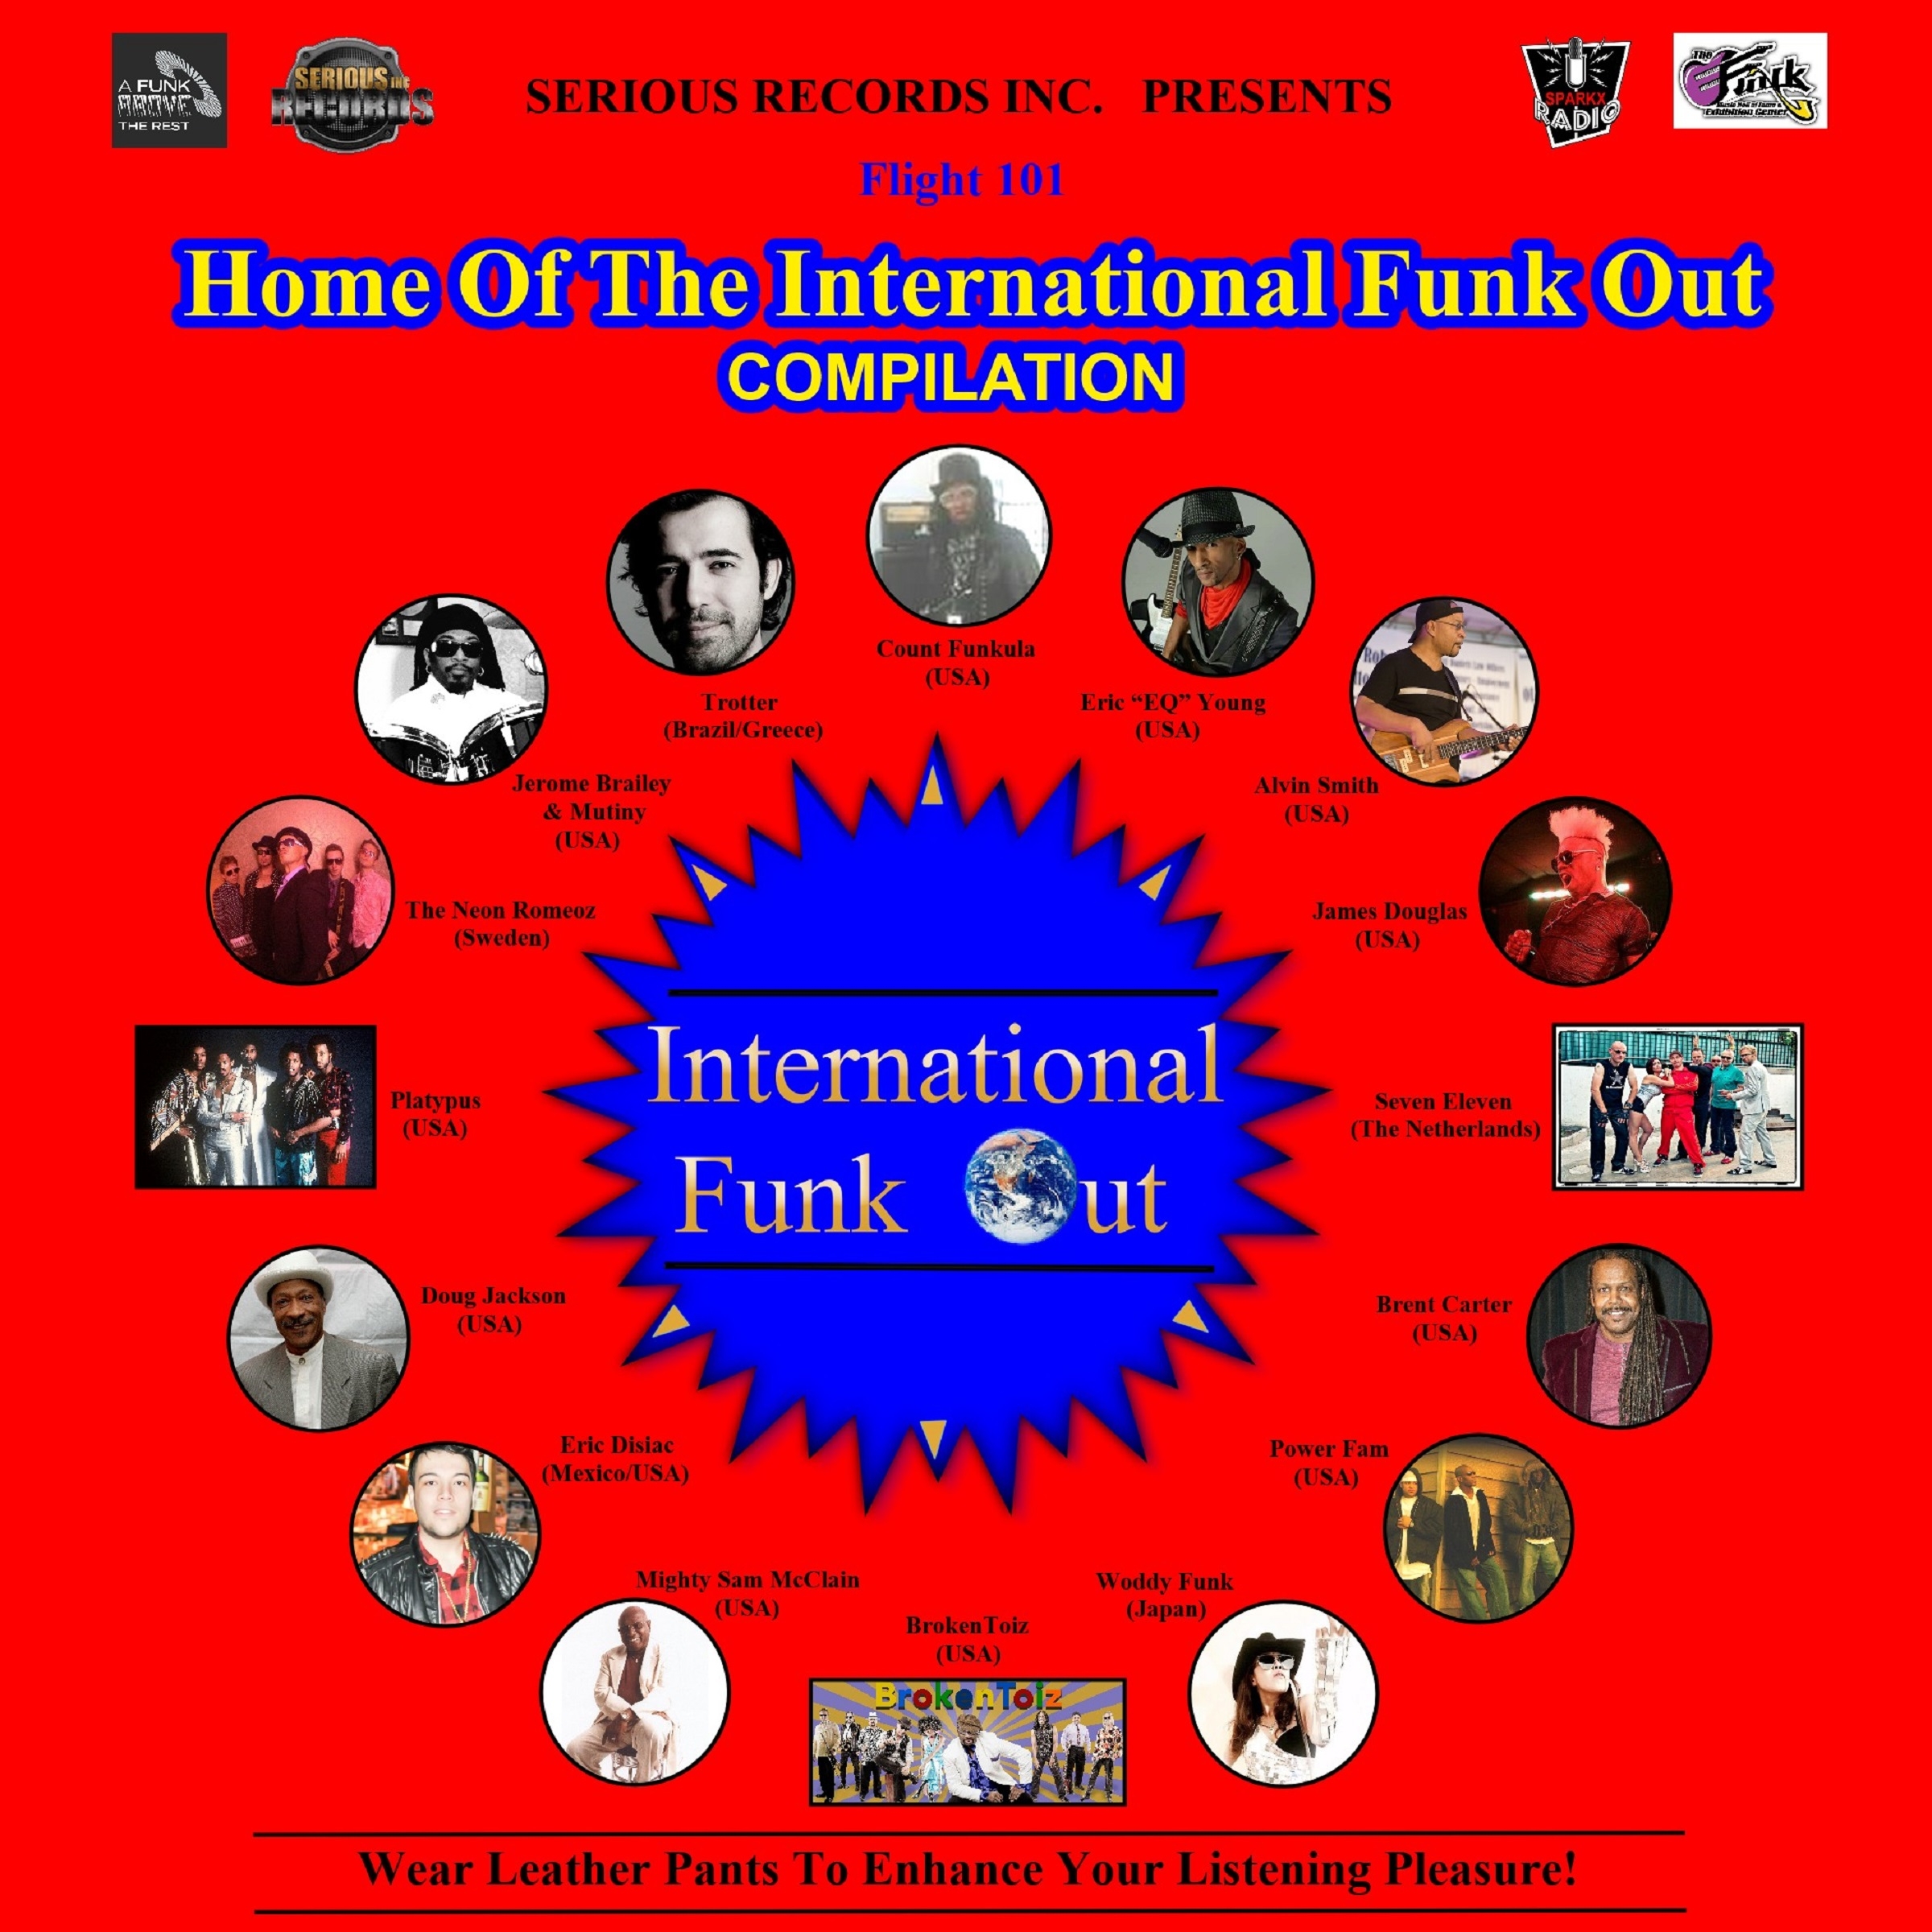 Home of the International Funk Out